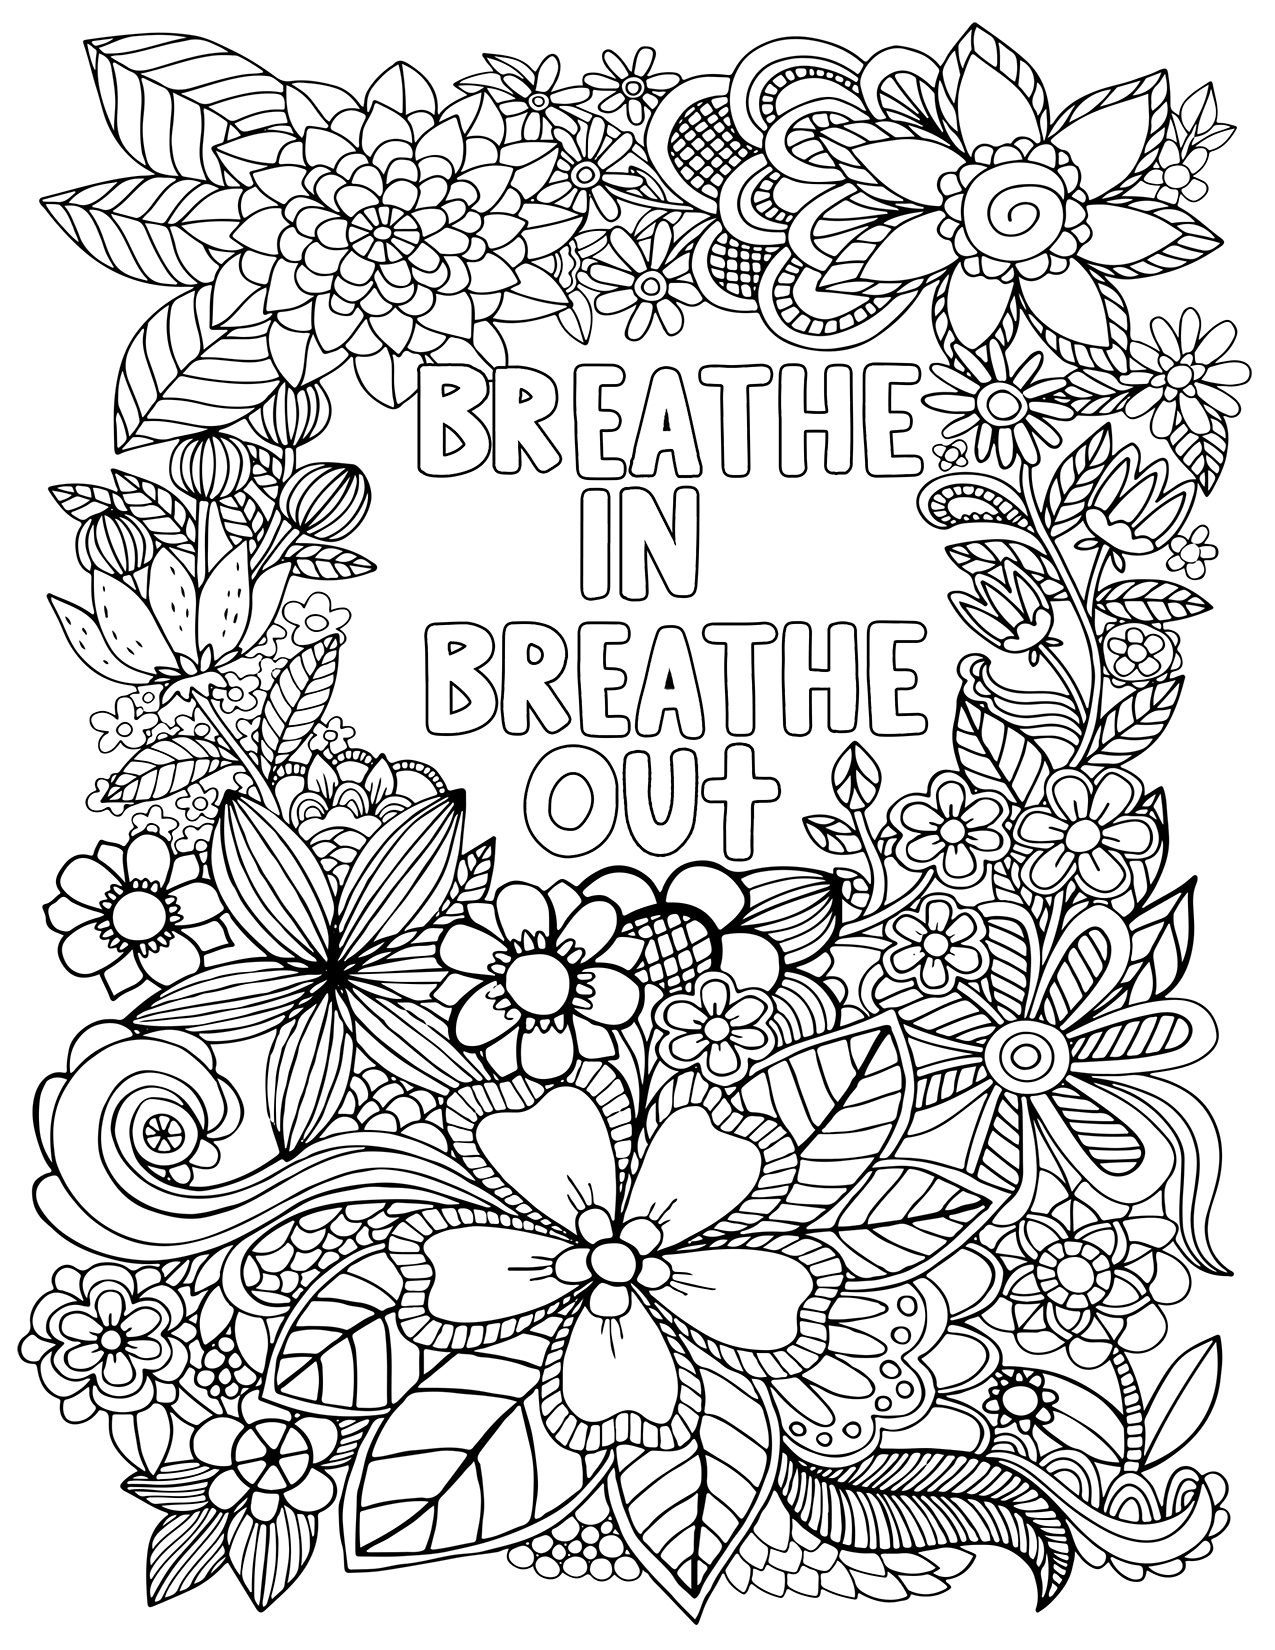 Breath In Breathe Out free adult coloring sheet printable